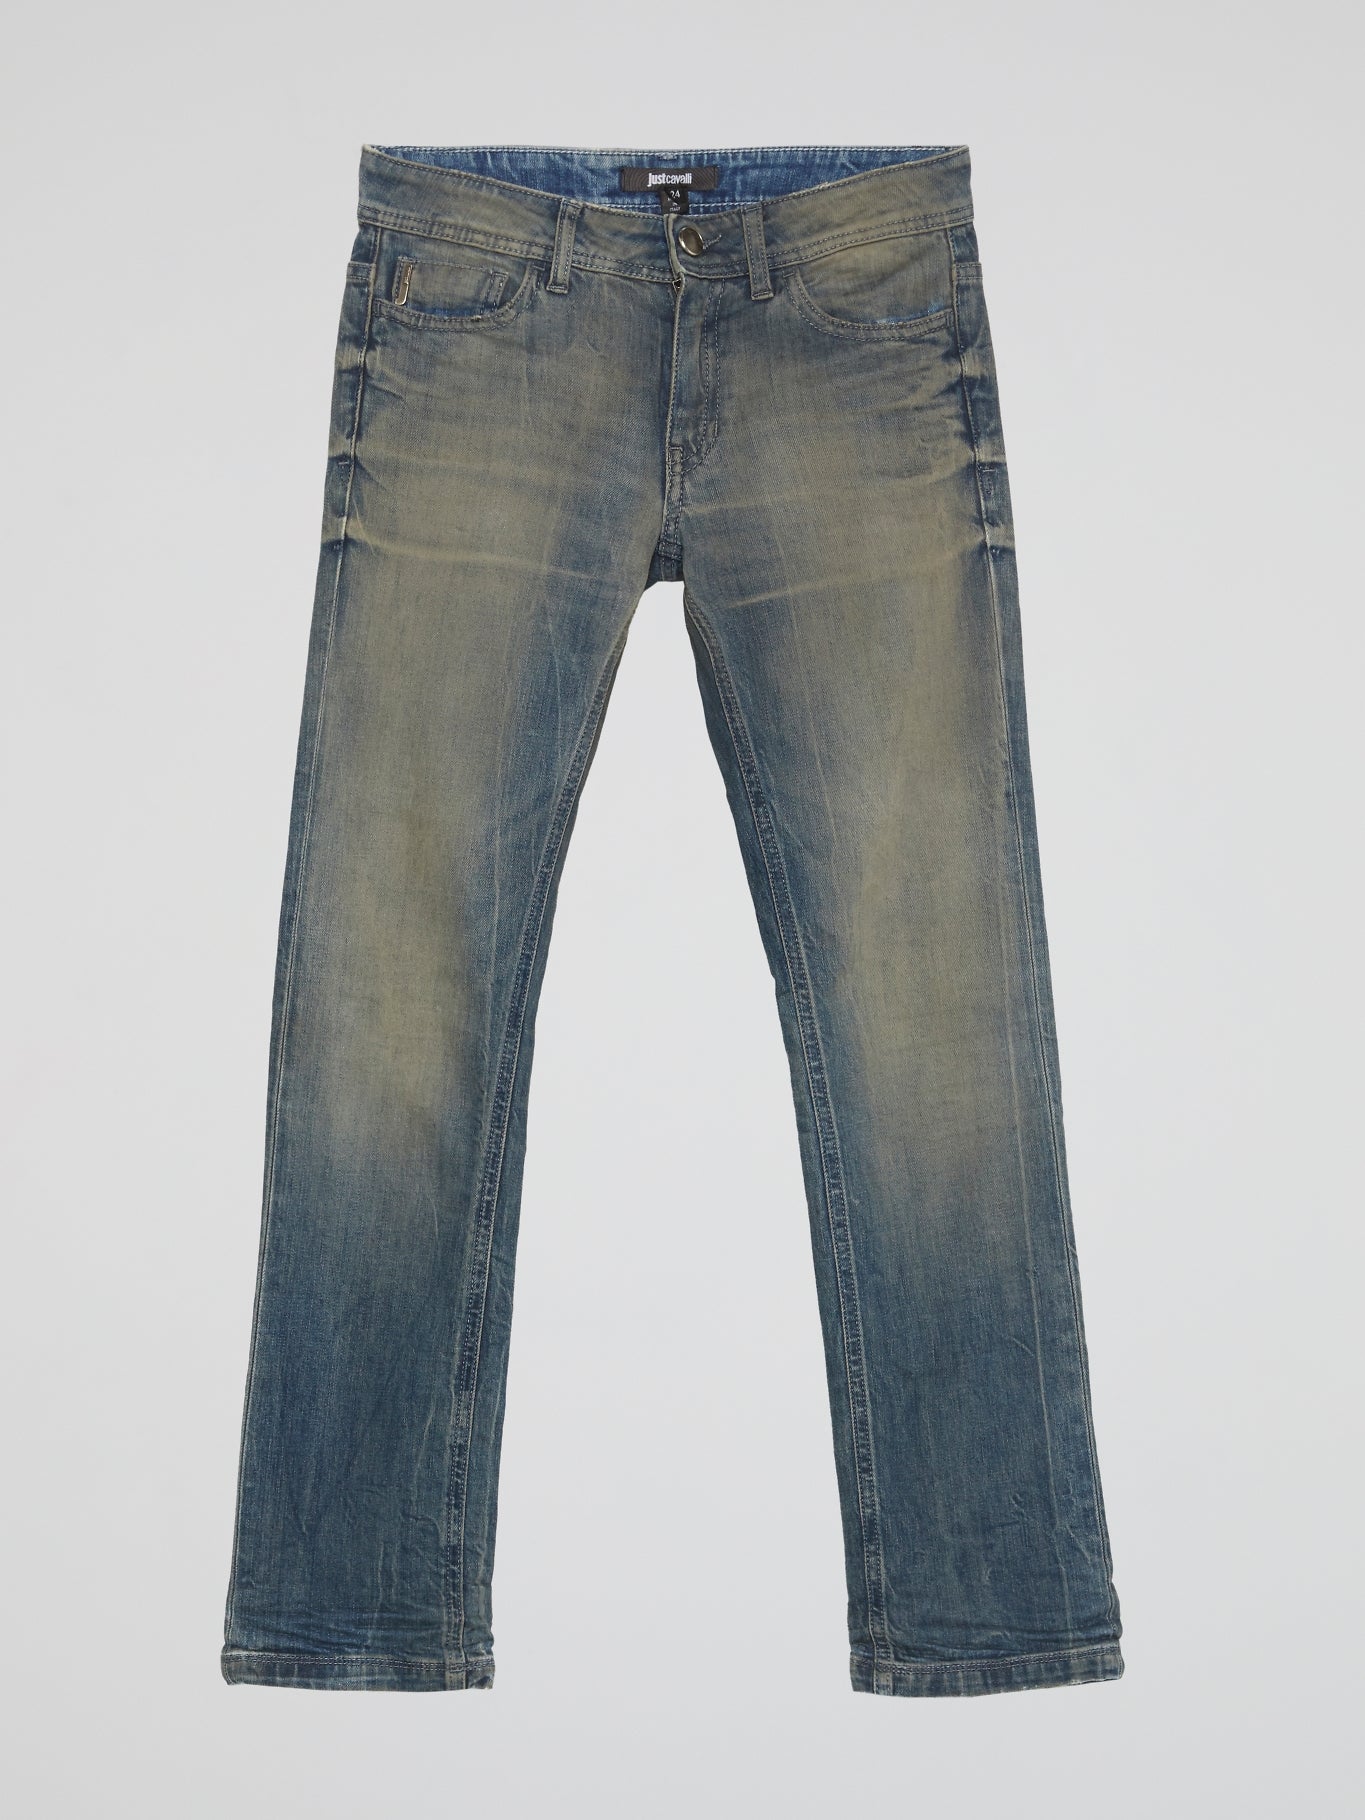 Rustic Straight Cut Jeans